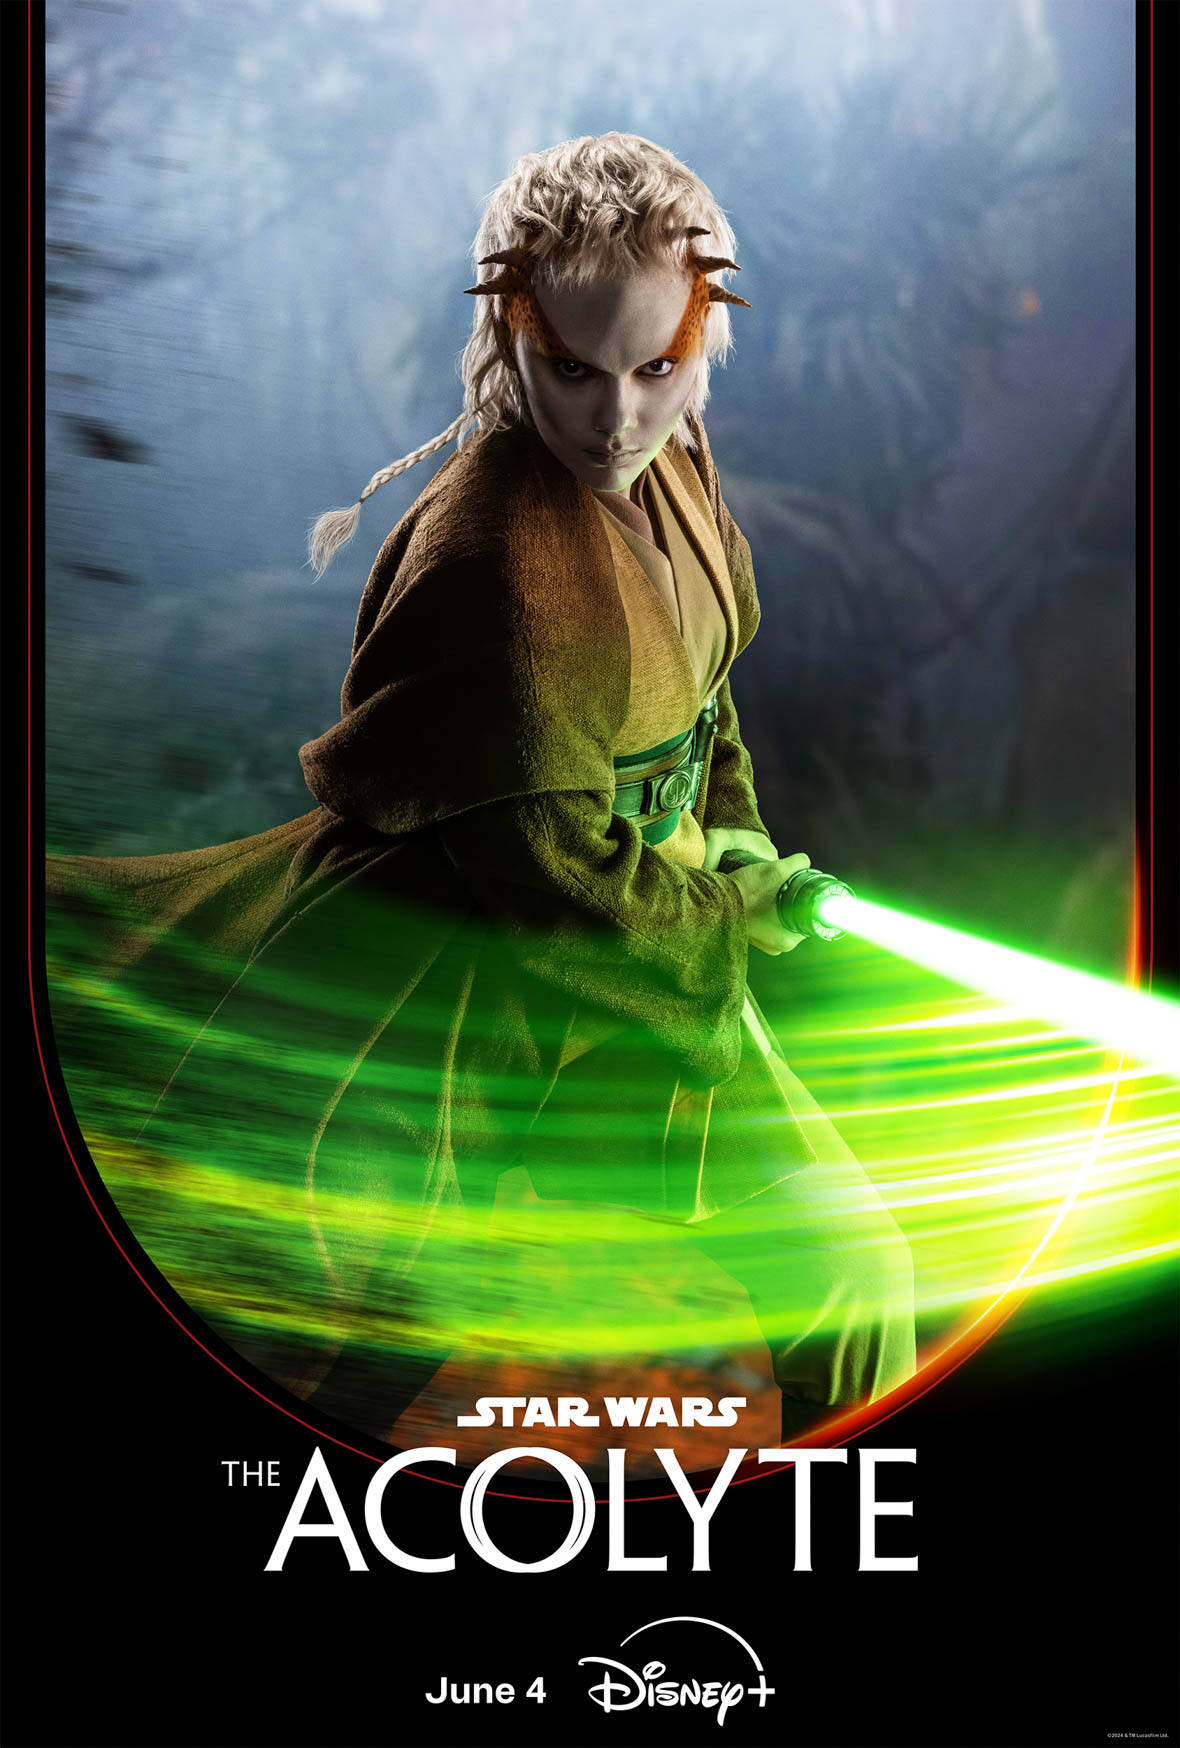 Jecki Lon, a humanoid alien with white skin and hair and horns lining her forehead, holds her green lightsaber out, a train of green light implying she has just swung her blade towards the viewer. A black border frames the bottom of the image with the logo for Star Wars: The Acolyte written in white font.